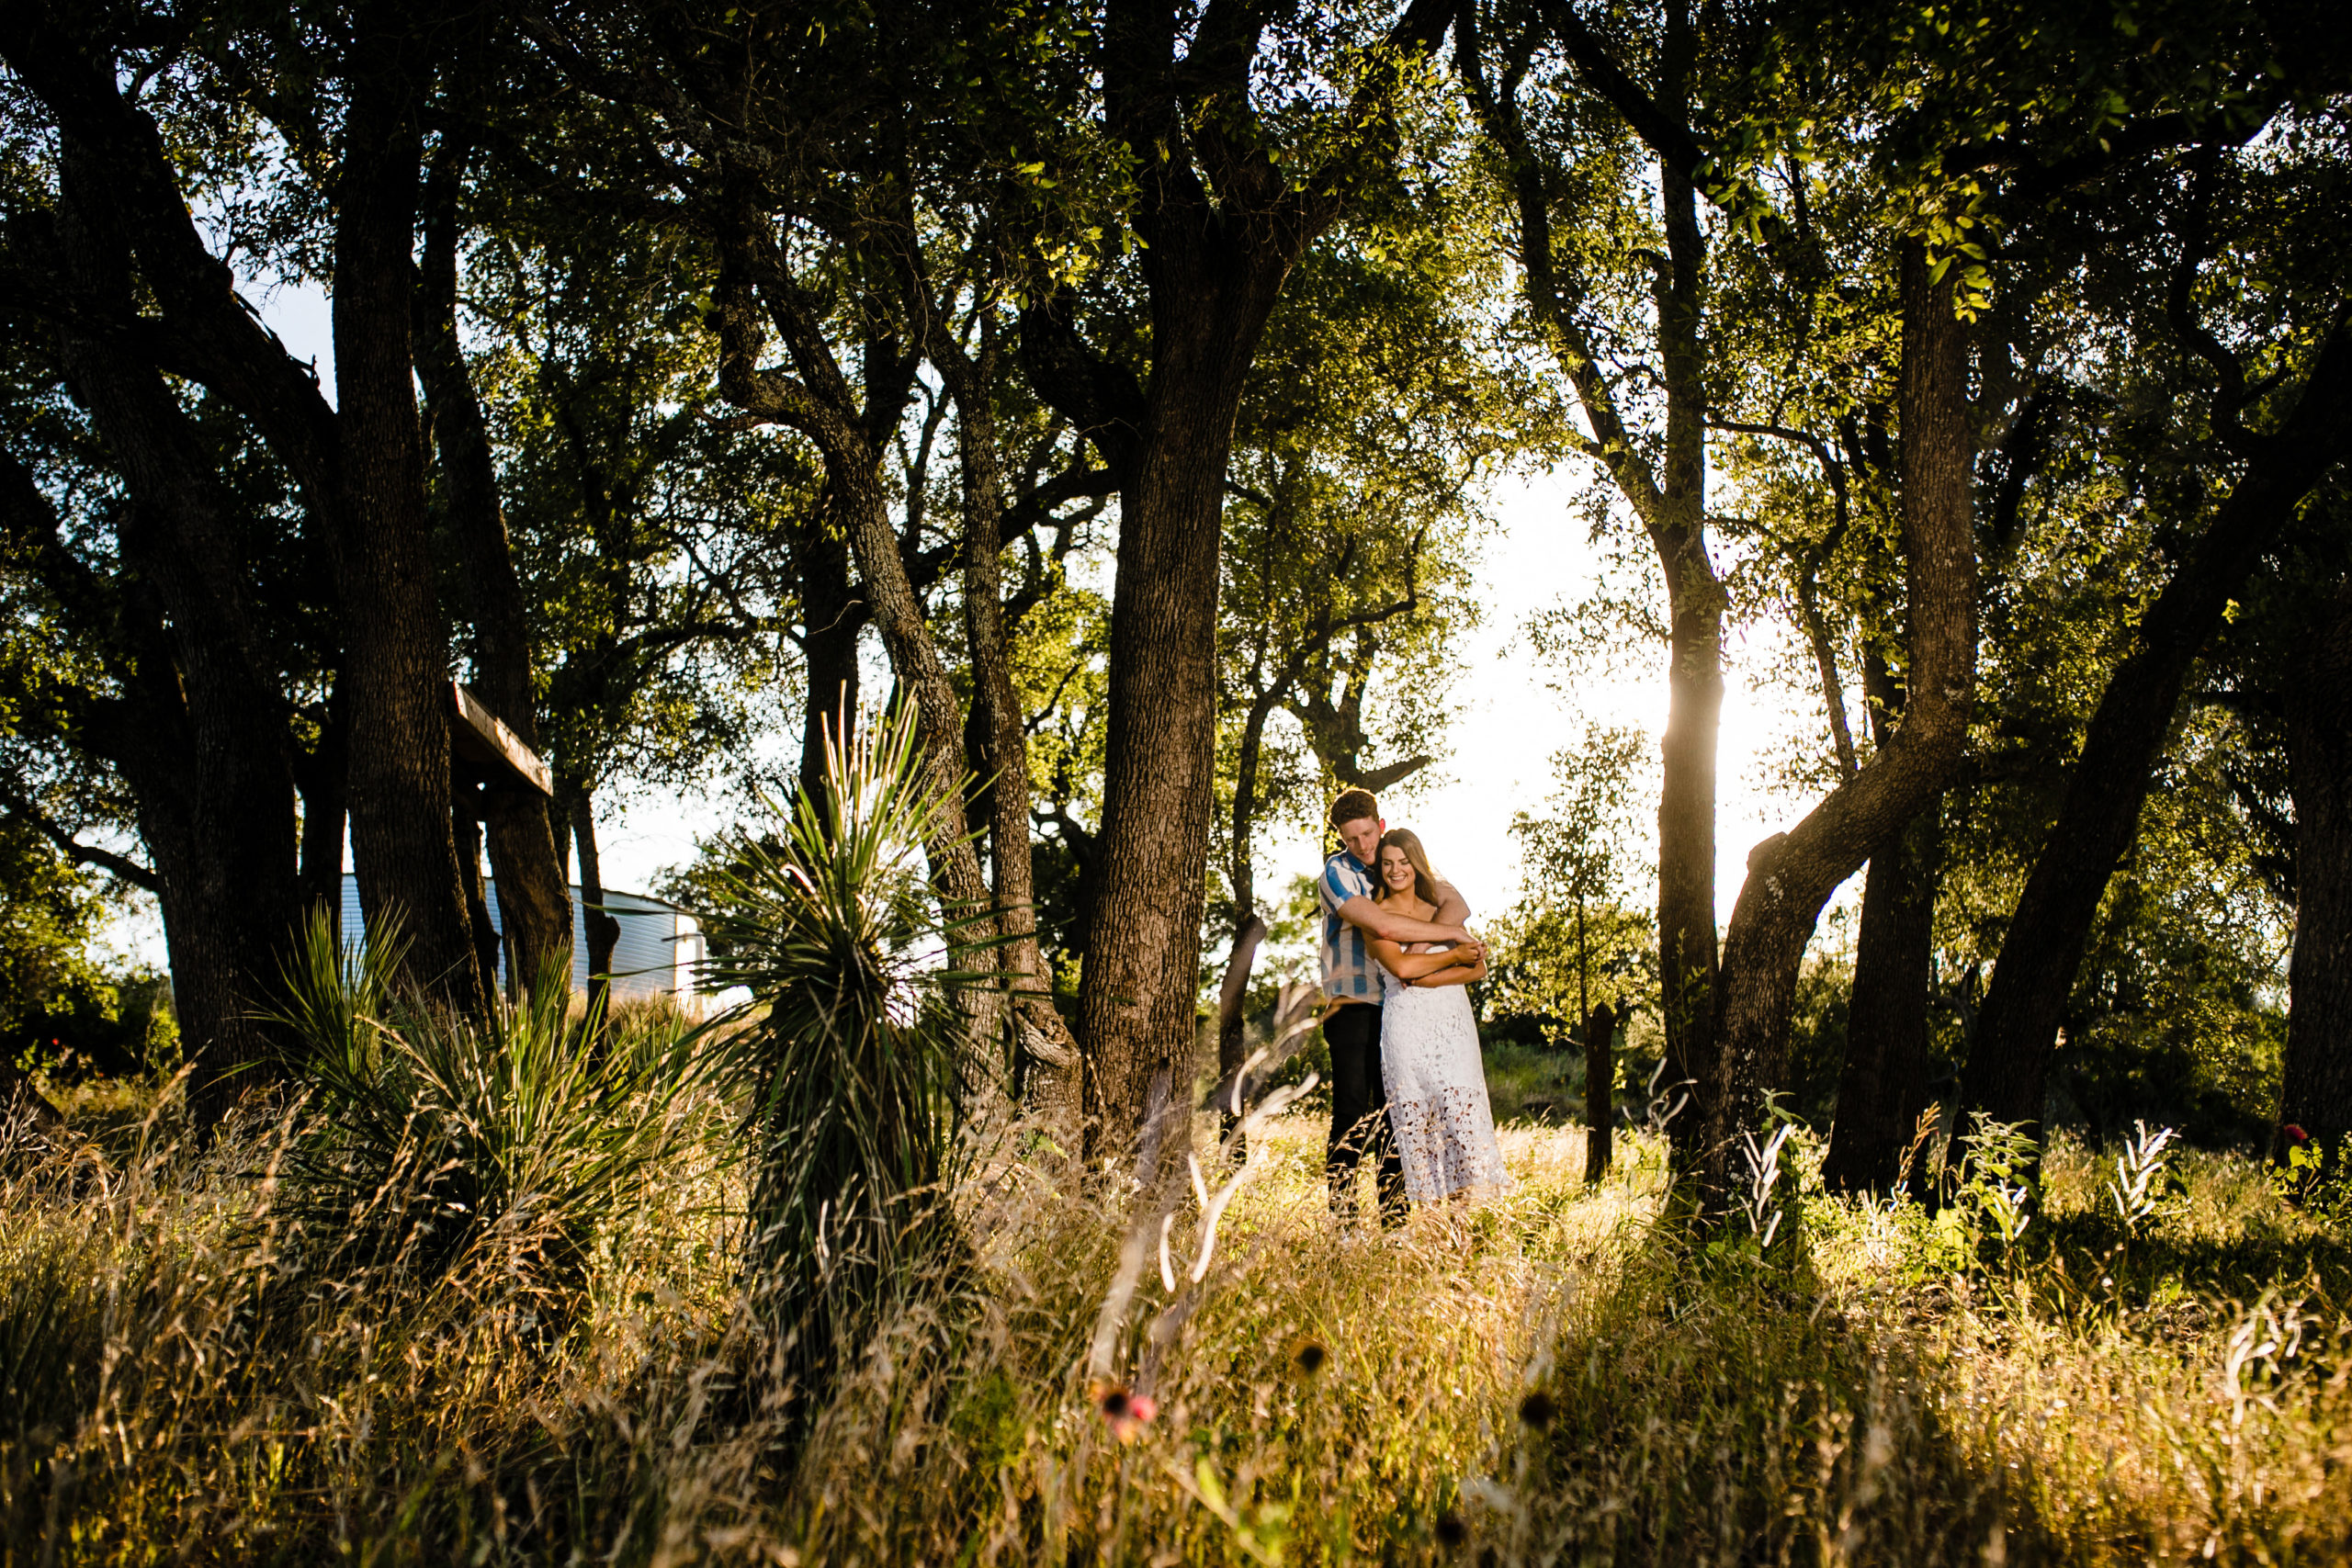 Janna and Austin’s Engagement Session